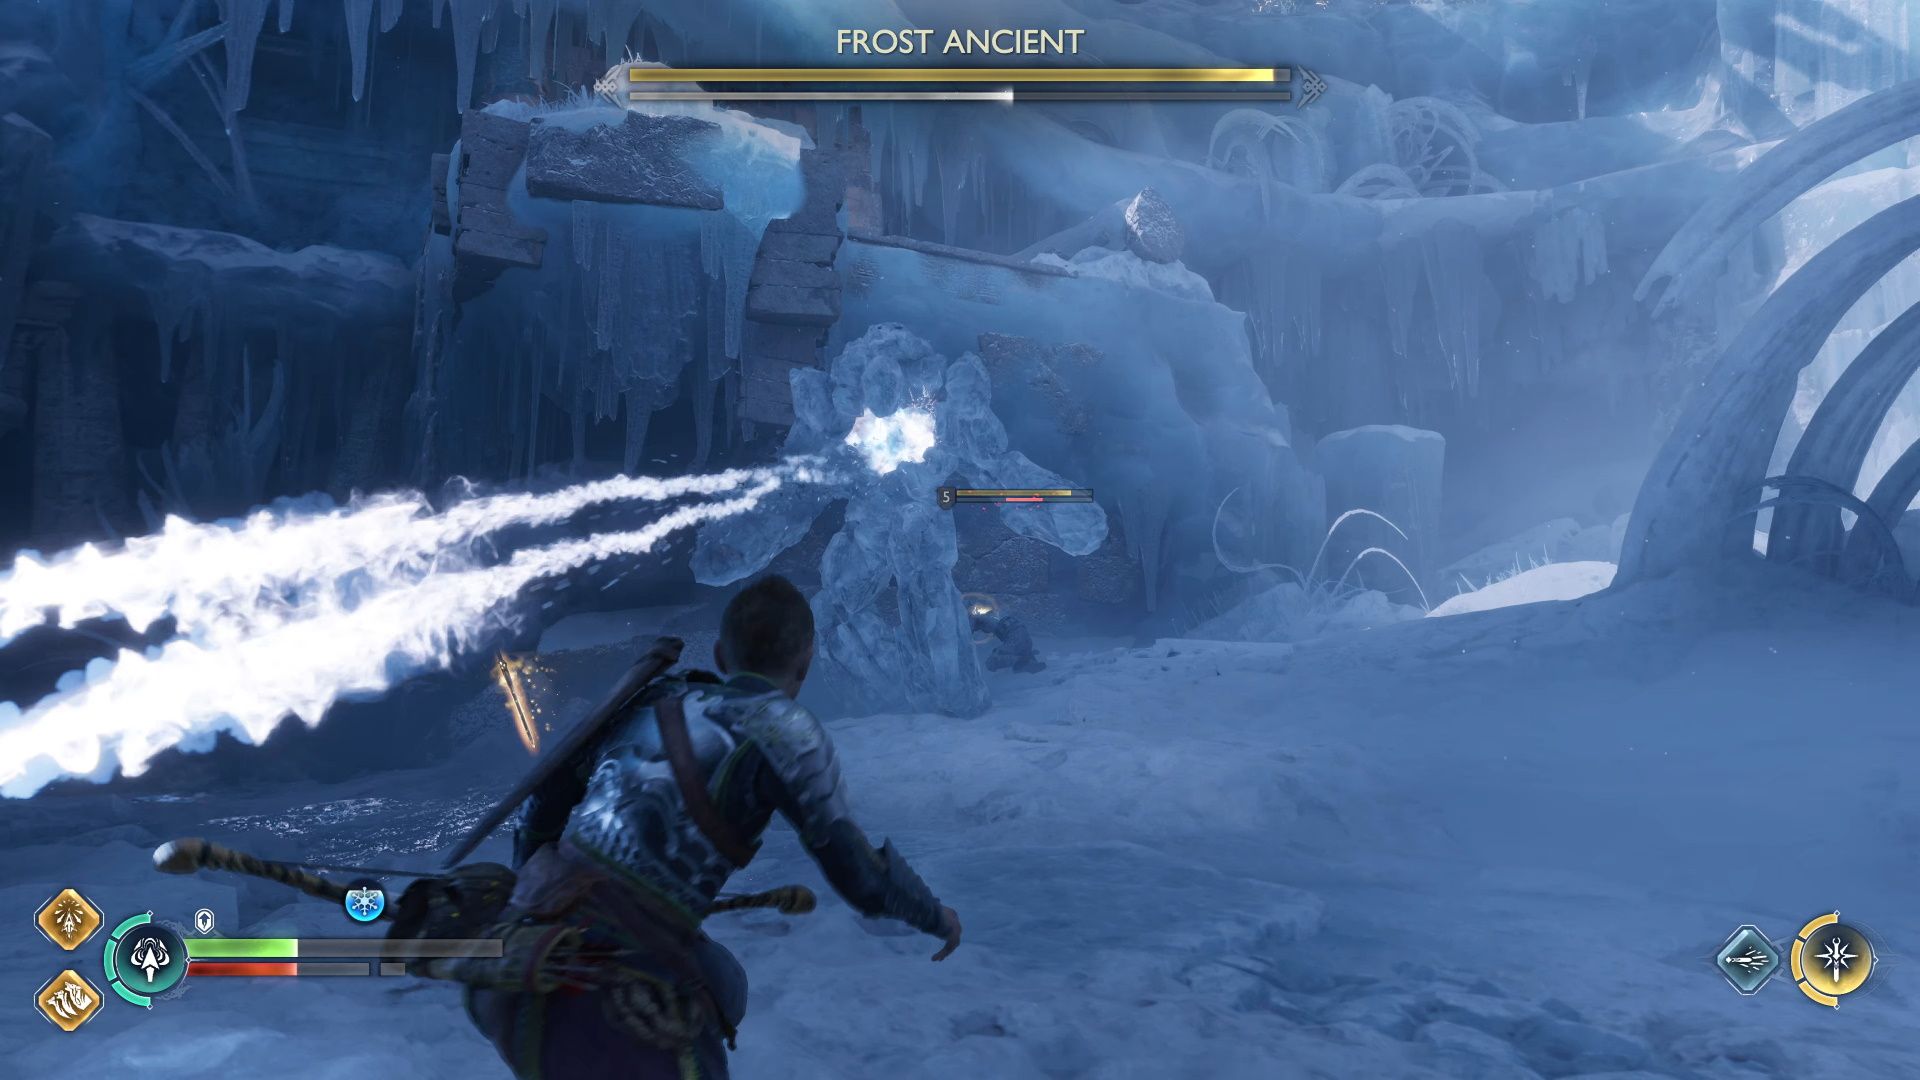 God Of War Ragnarok, Unlocking The Mask, Doding The Frost Giant's Projectile Attack